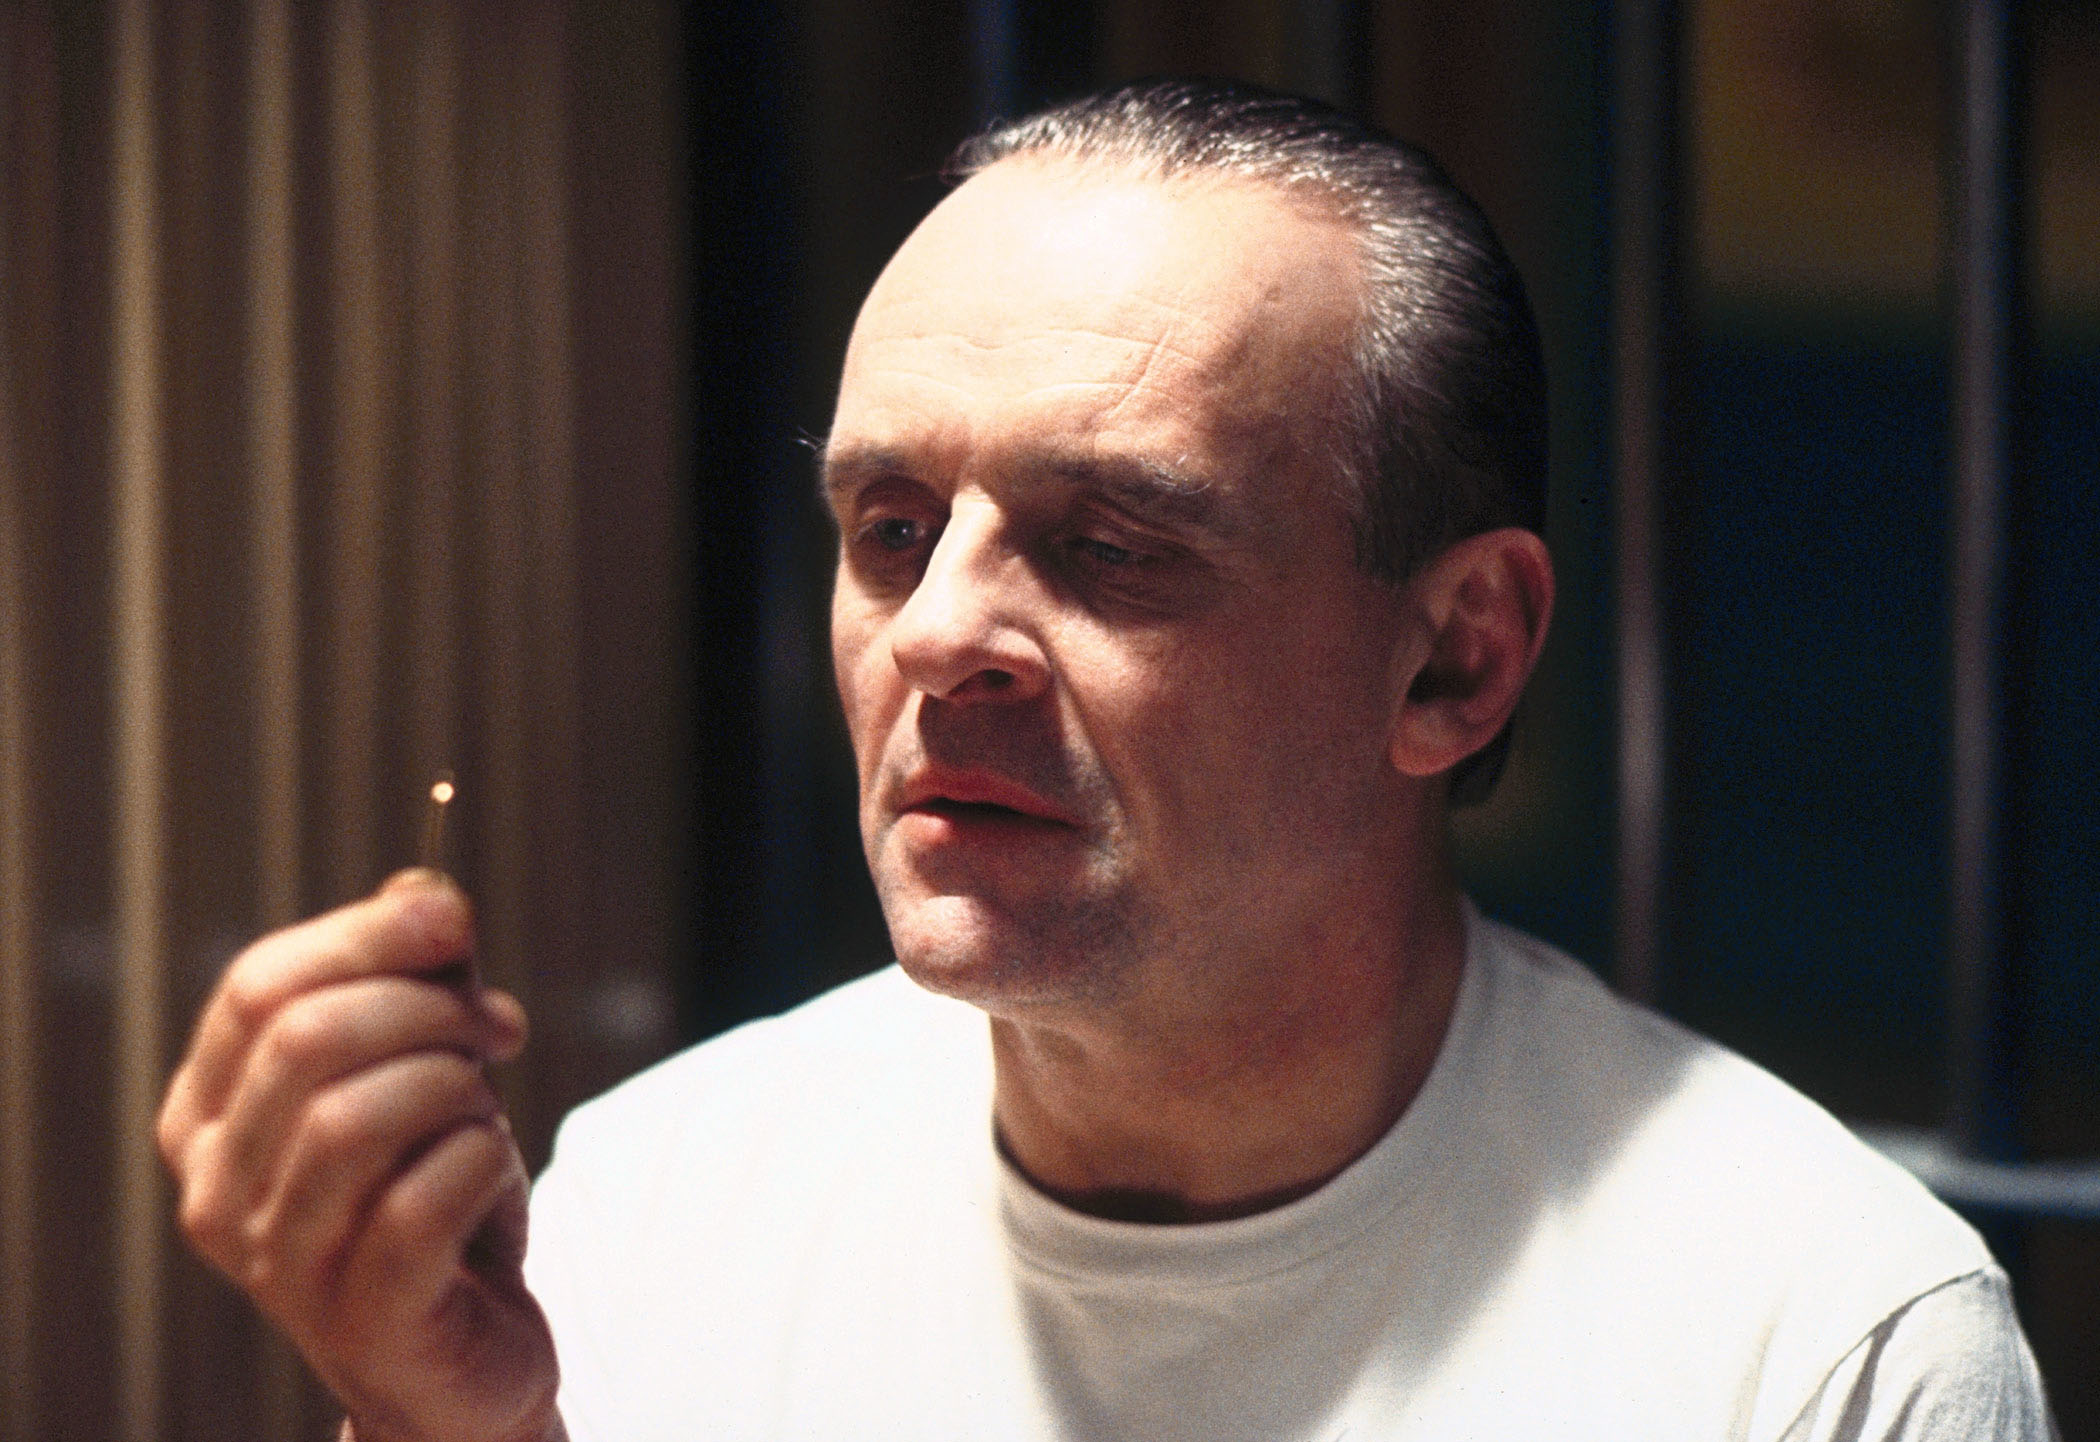 Man in white T-shirt sitting, holding a toothpick, with a focused expression